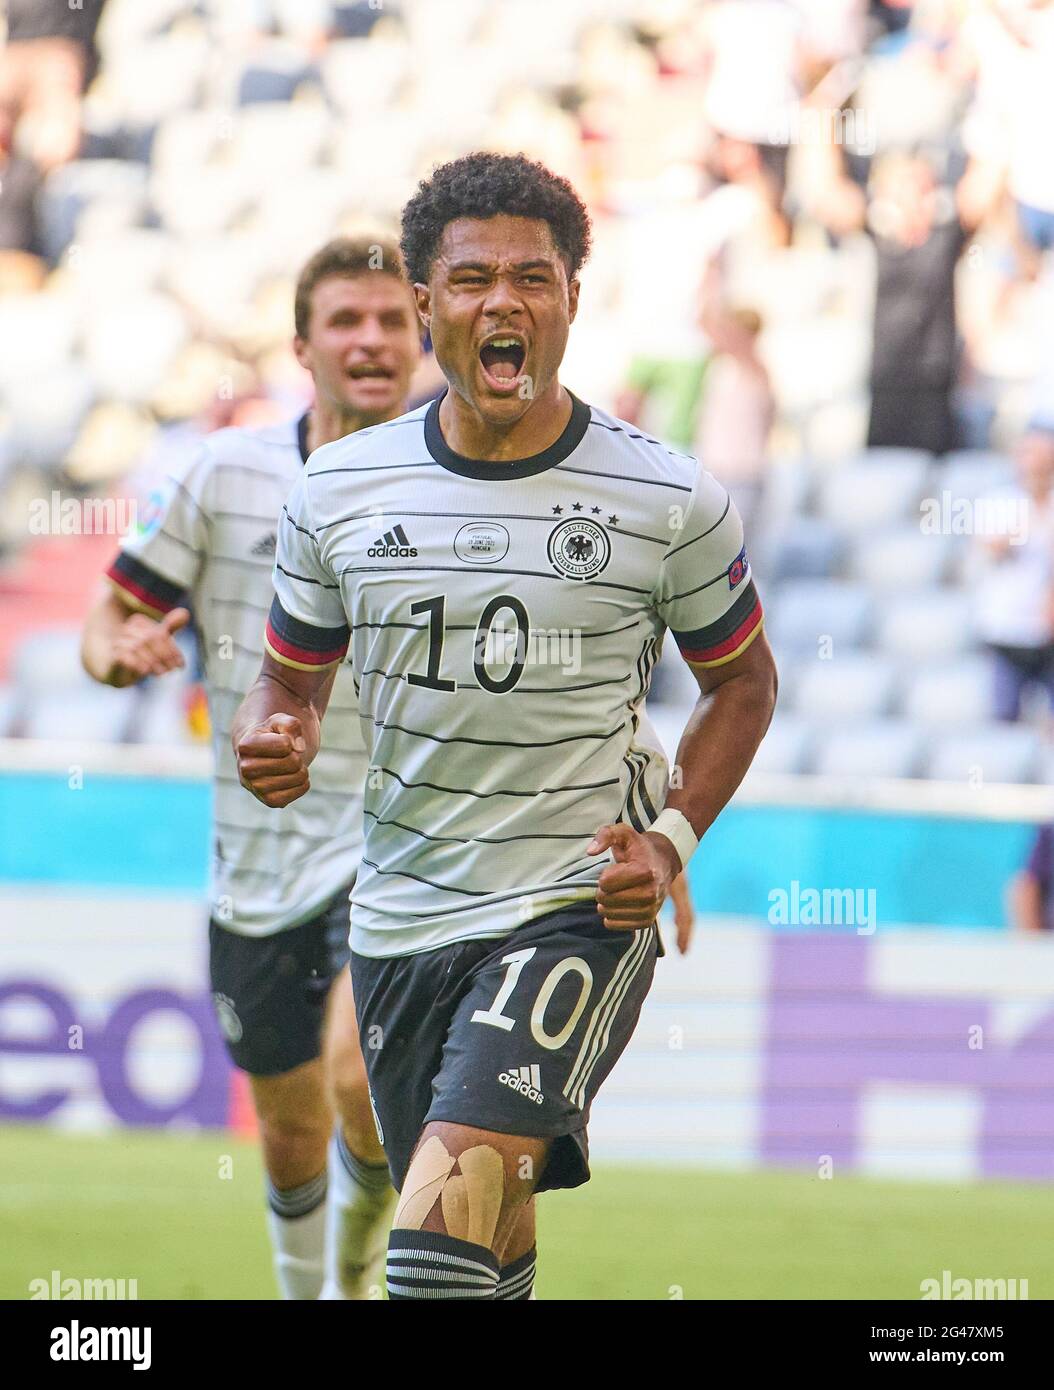 Serge Gnabry, DFB 10   scores, shoots goal , Tor, Treffer,,, 1-2 jubel, celebrates his goal, happy, laugh, celebration,  in the Group F match PORTUGAL - GERMANY  at the football UEFA European Championships 2020 in Season 2020/2021 on June 19, 2021  in Munich, Germany. © Peter Schatz / Alamy Live News Stock Photo